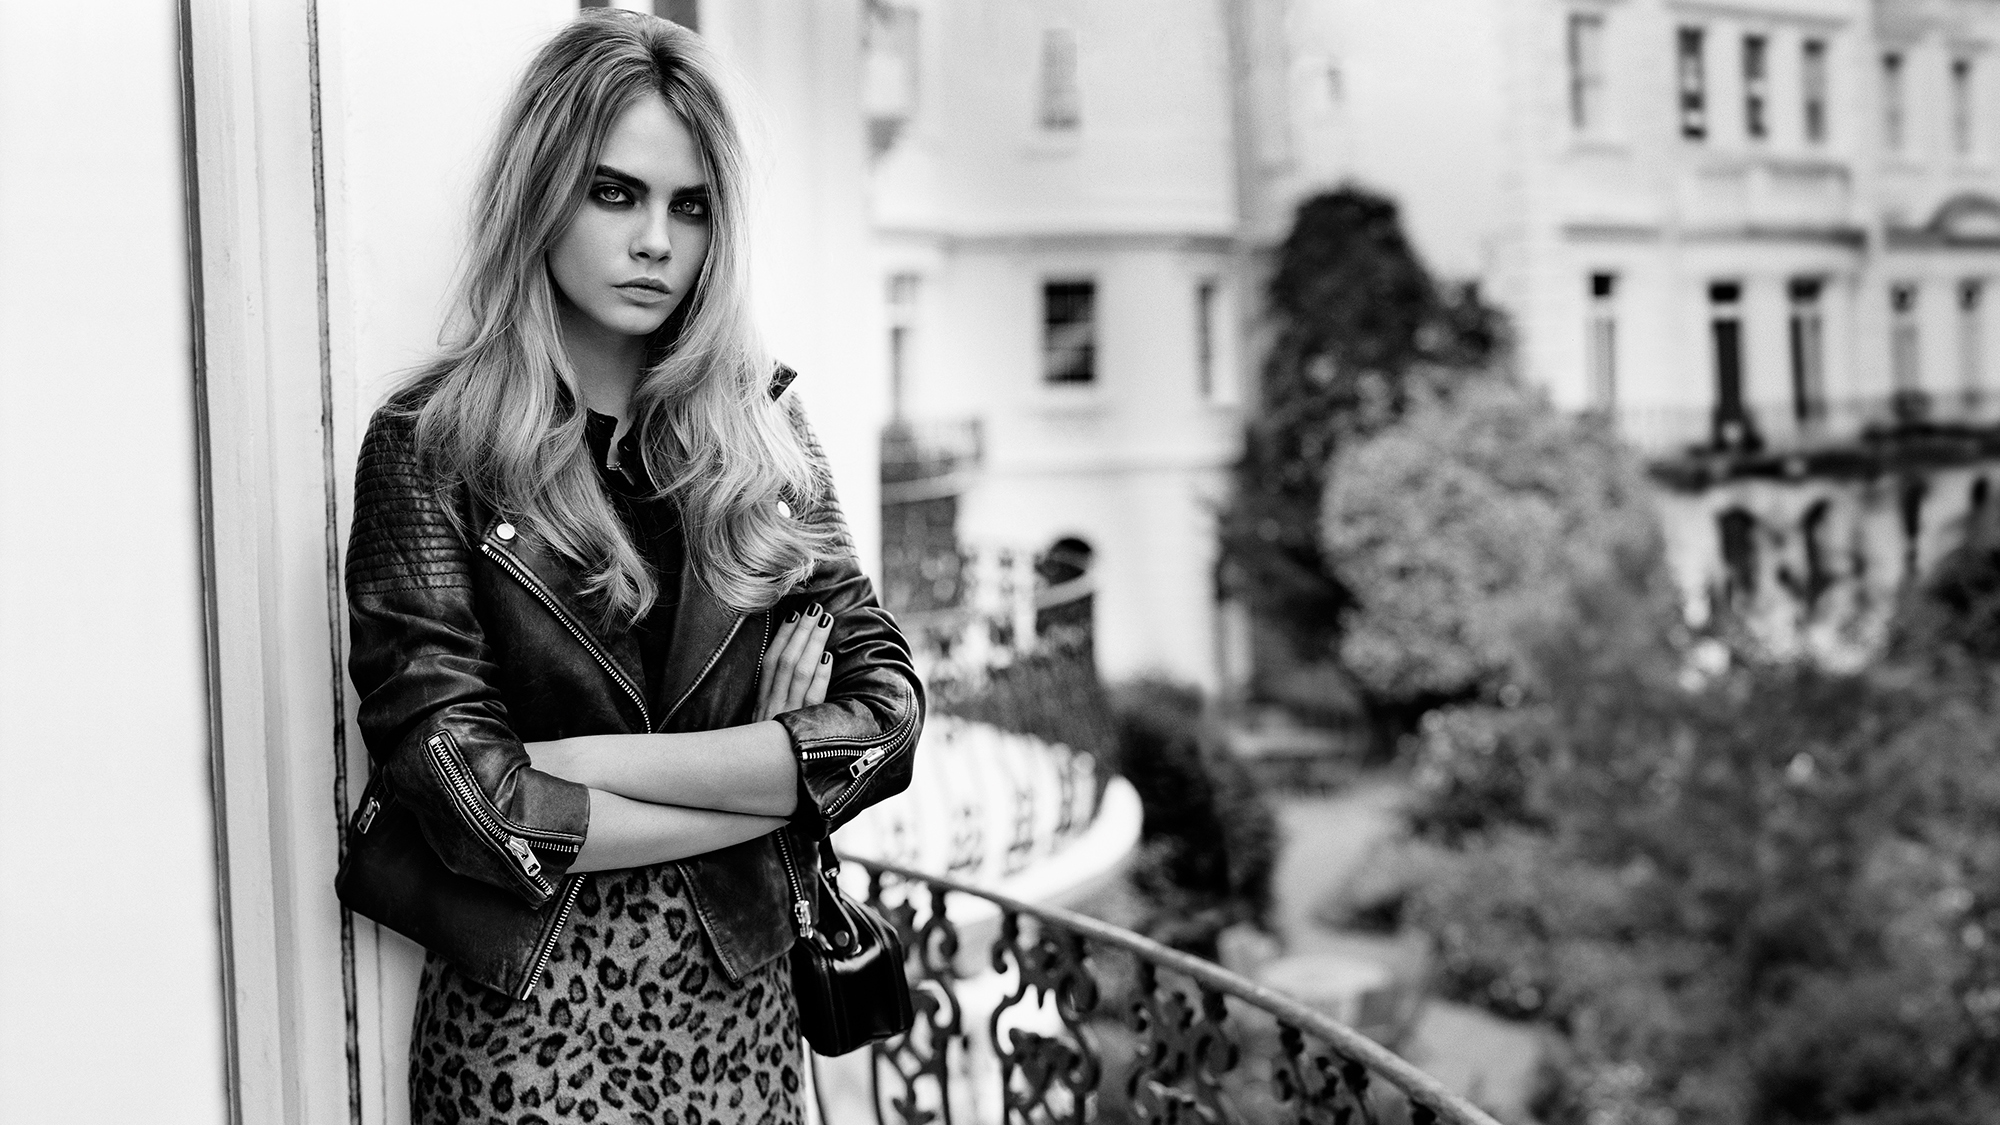 People 2000x1125 women Cara Delevingne model leather jacket arms crossed celebrity actress monochrome